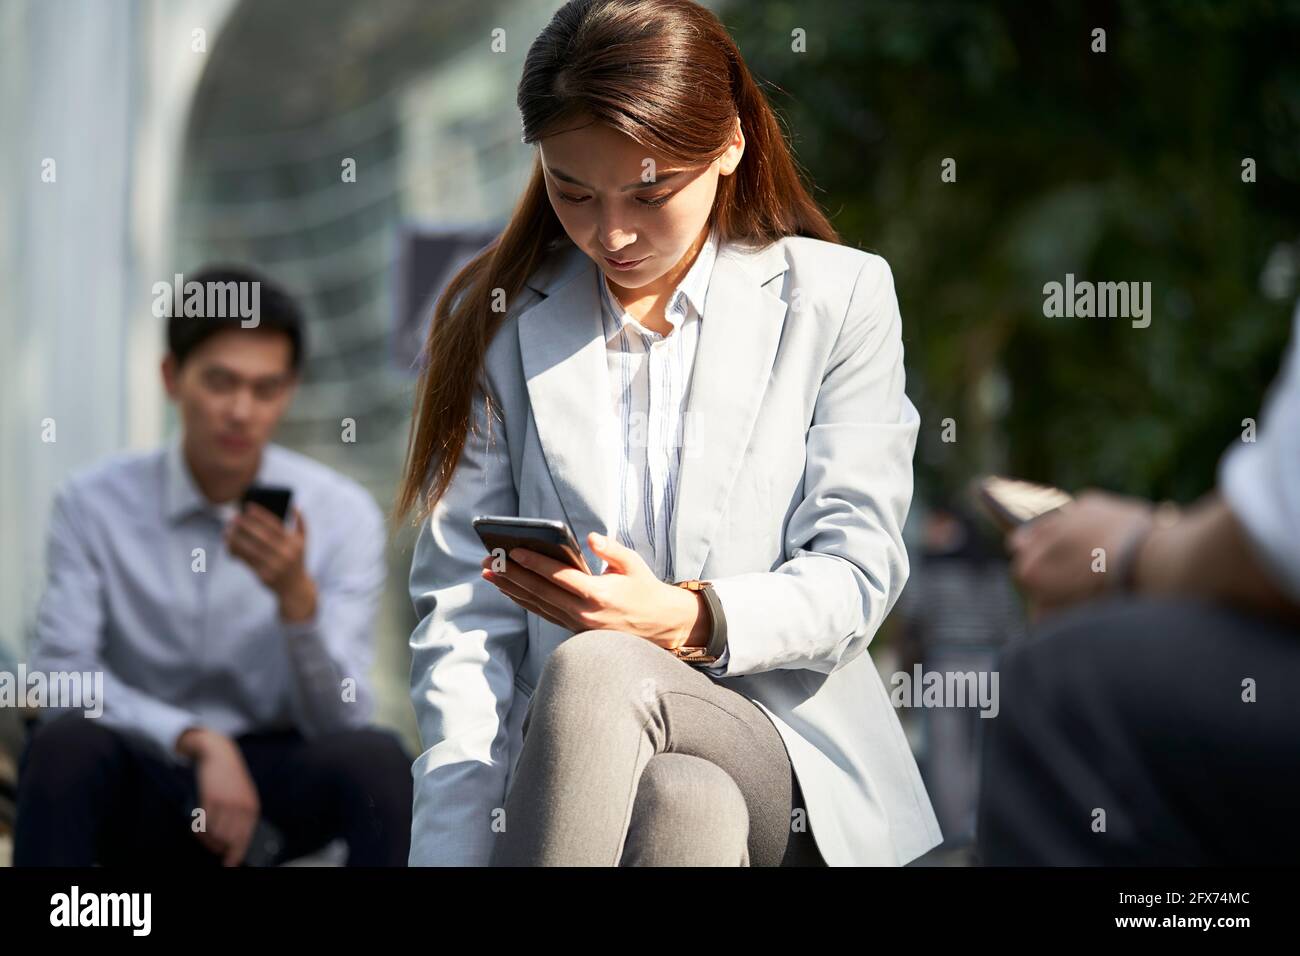 asian business woman looking at mobile phone outdoors Stock Photo